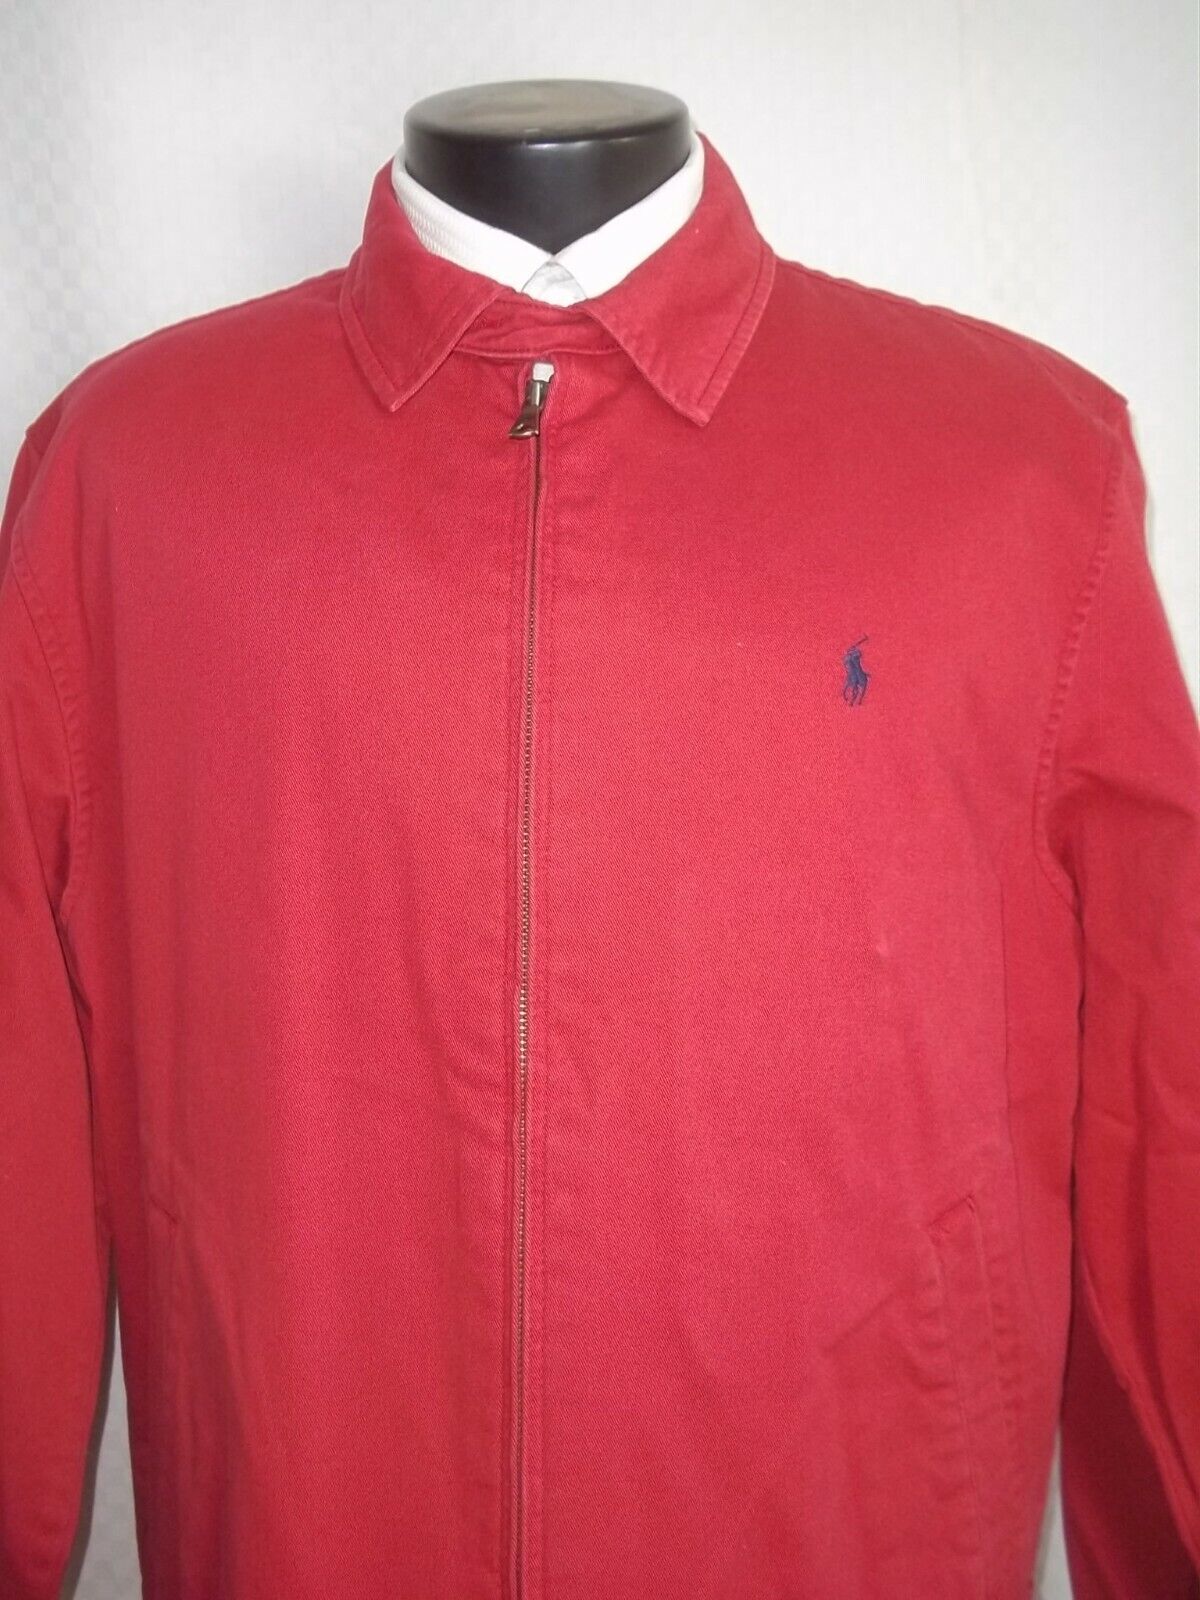 Polo Ralph Lauren Solid Red Zipper Front Cotton S… - image 3